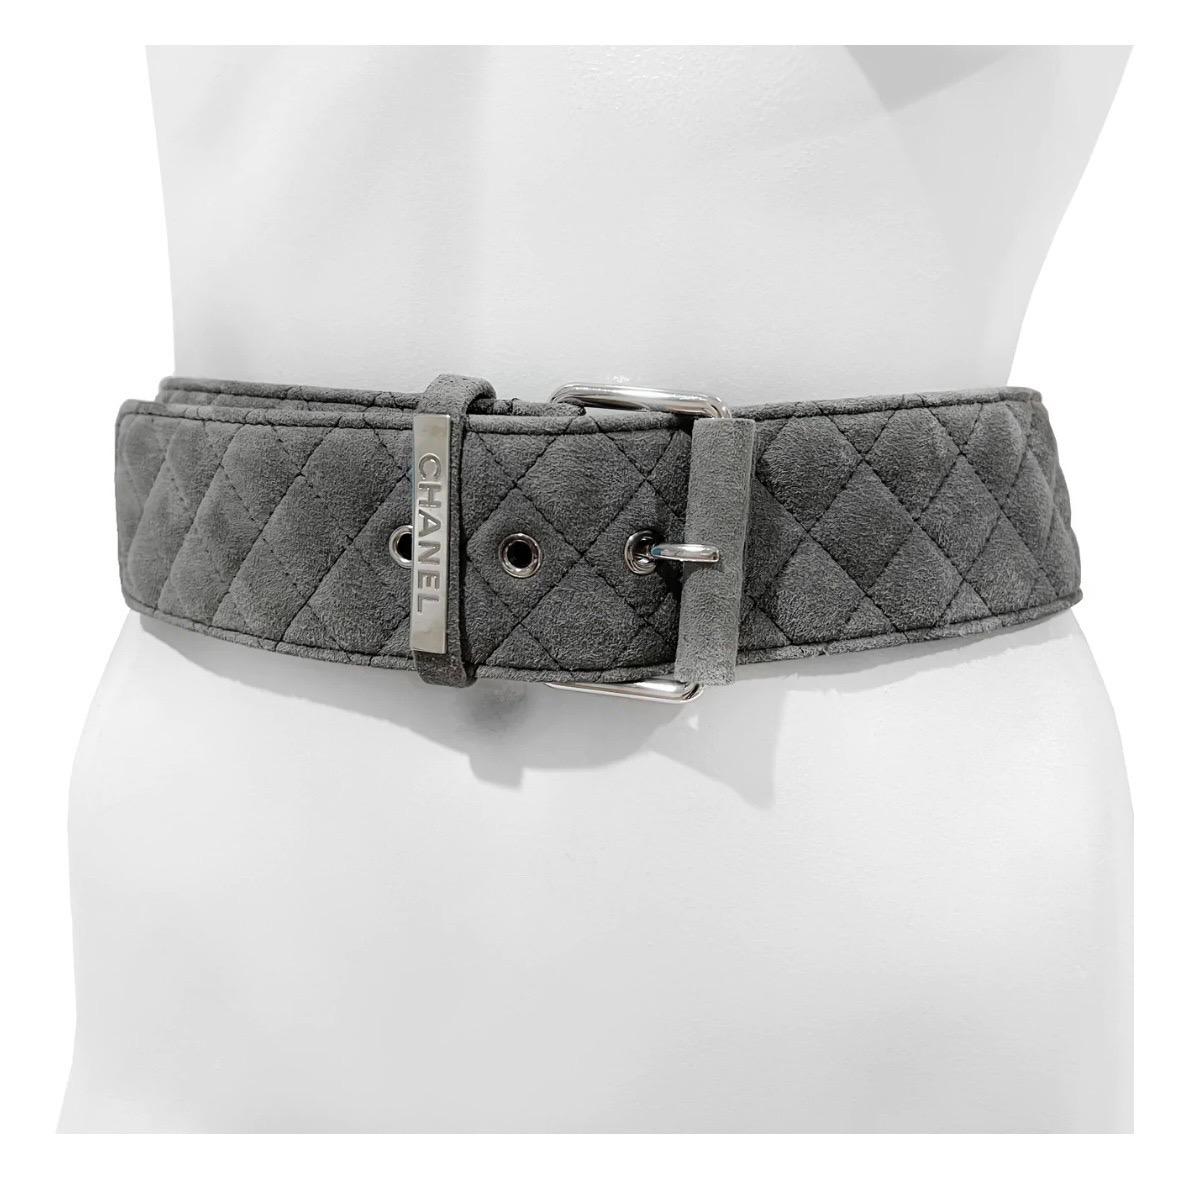 Quilted Suede Belt by Chanel
Fall 2011
Made in Italy 
Gray
Three holes for belt adjusting 
Excellent Condition; Preloved with little to no visible signs of wear or use throughout belt. 
Size/Measurements: (approximate)
Size 40
3/16